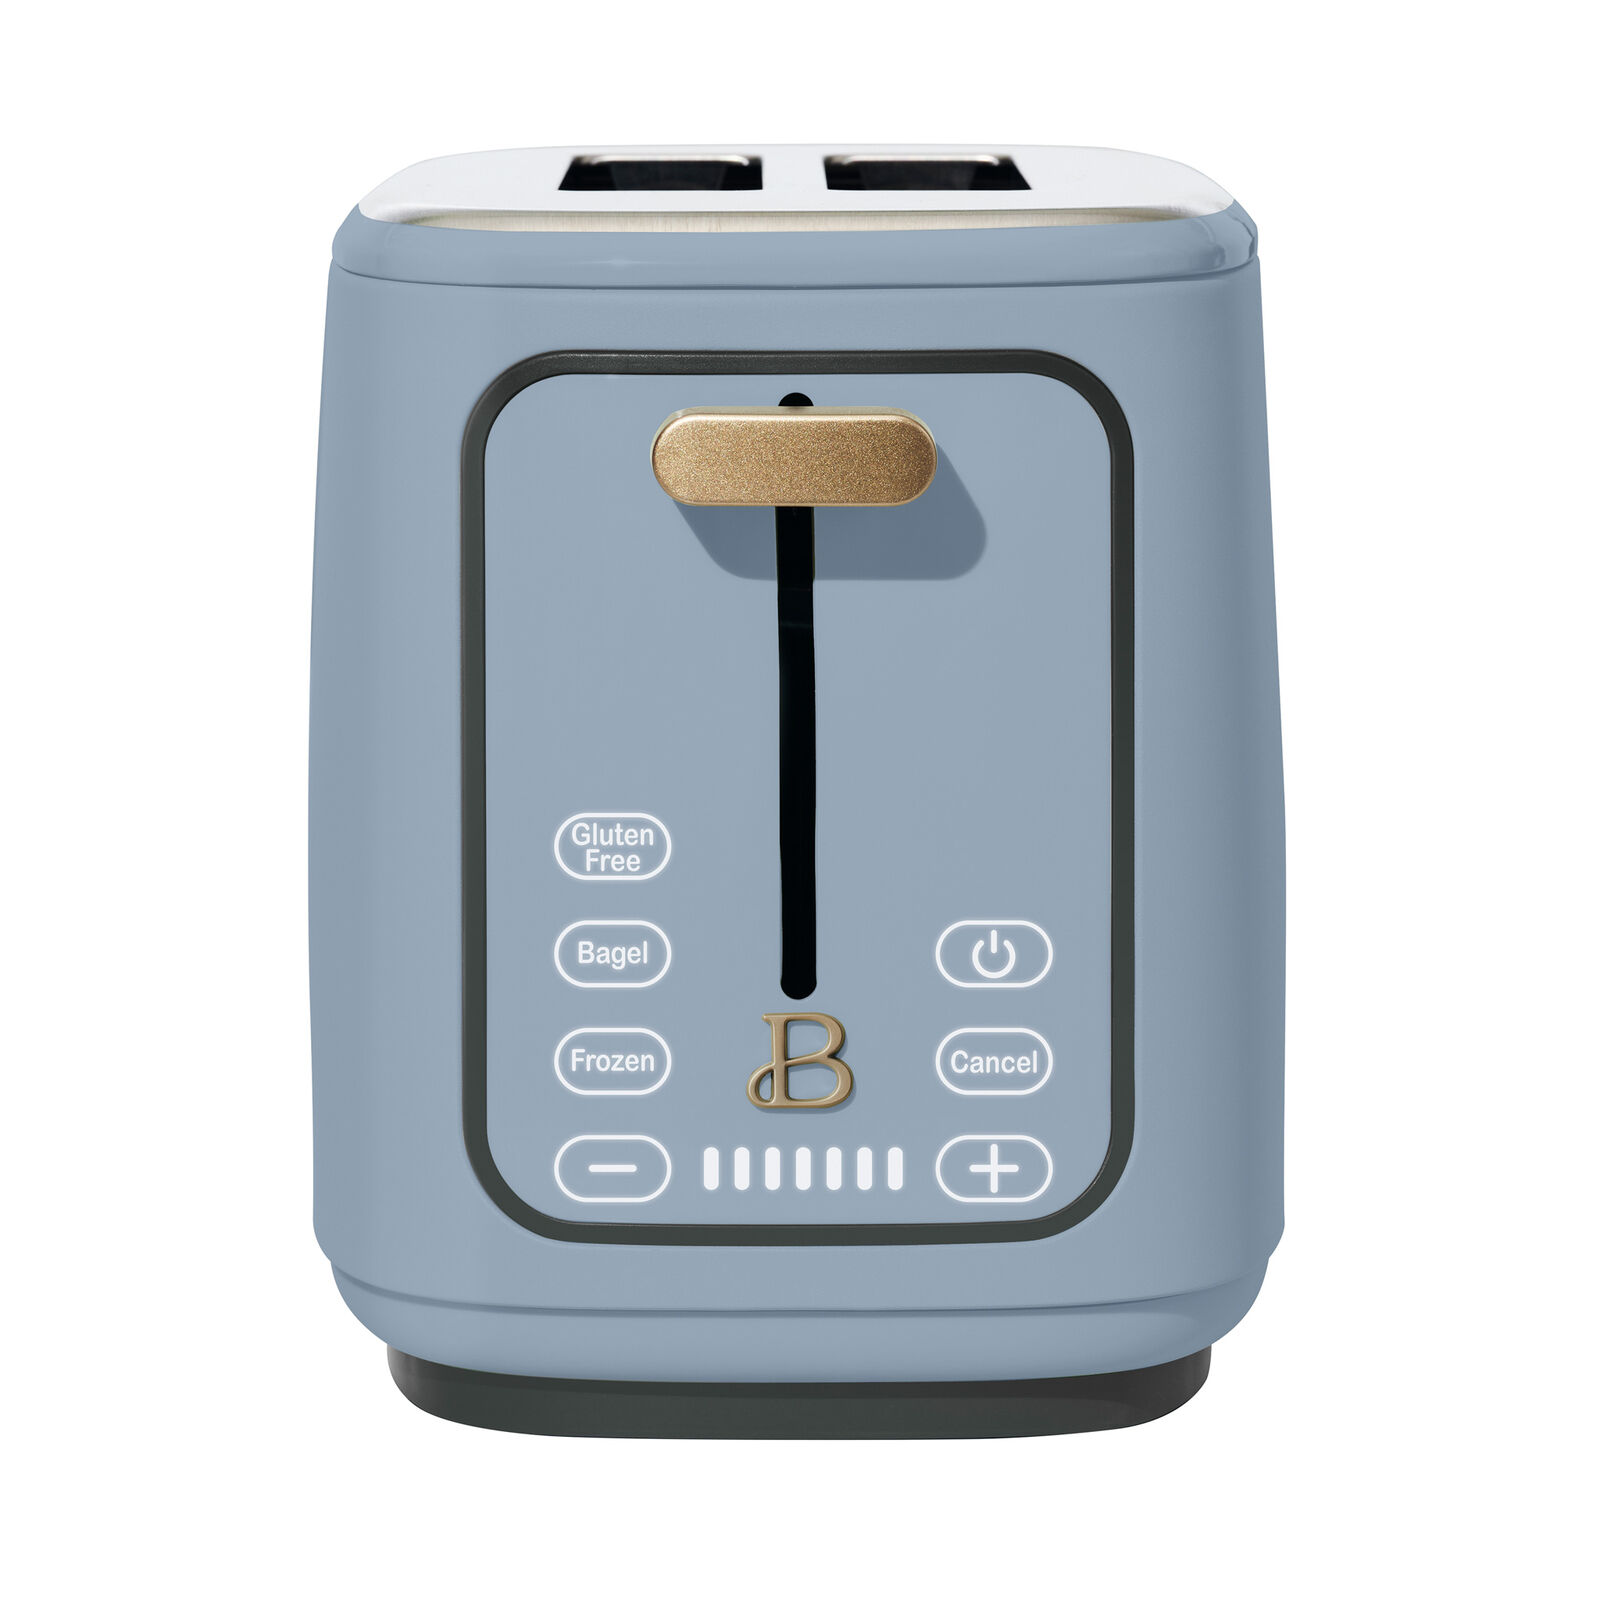 Beautiful 2 Slice Toaster with Touch-Activated Display